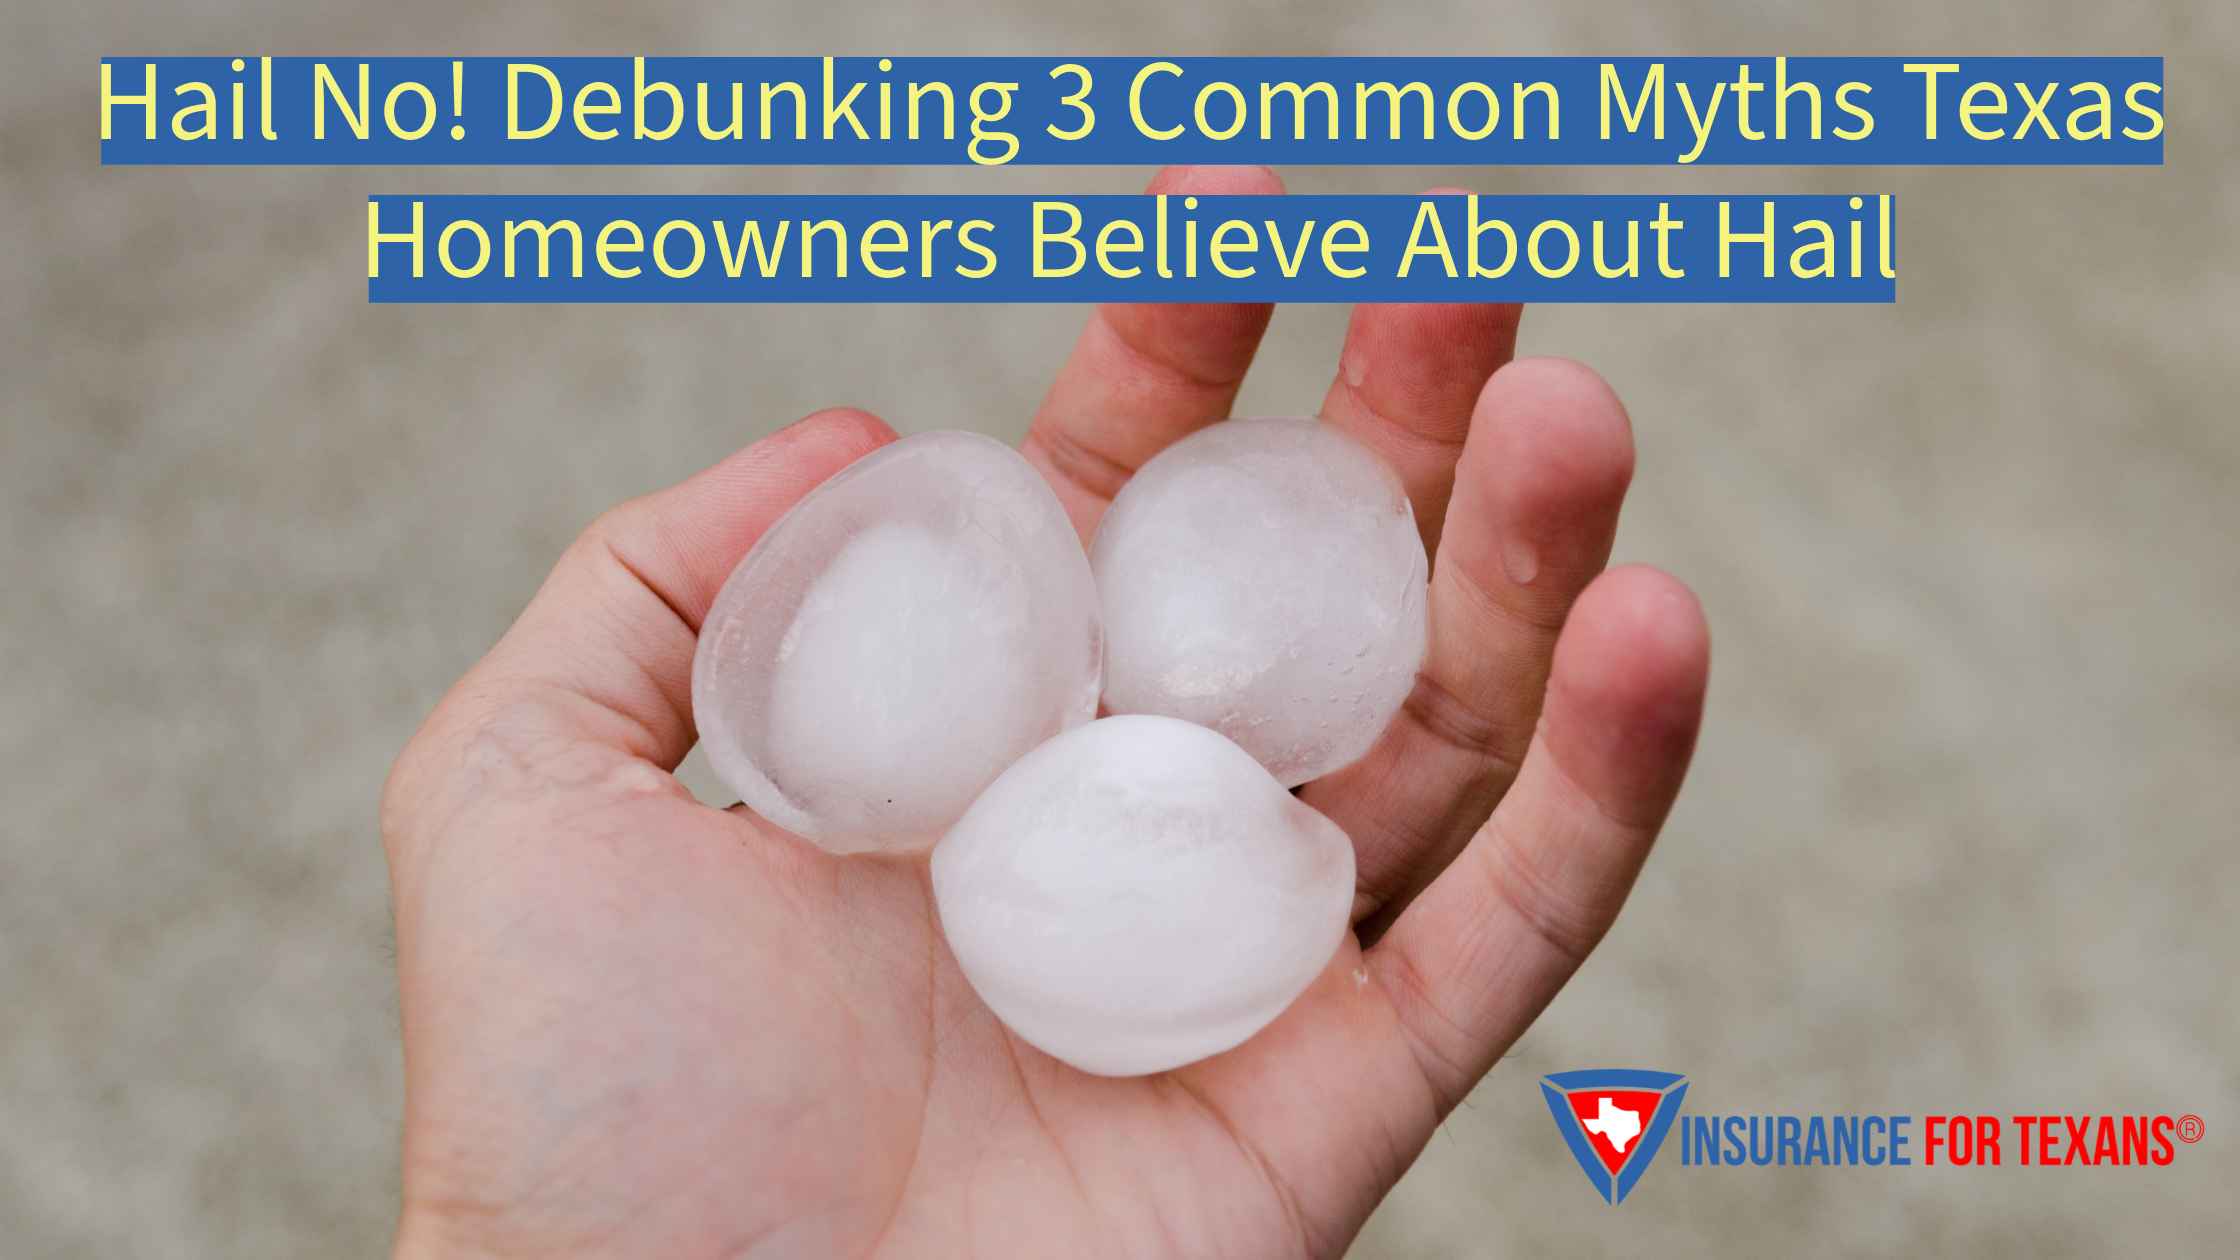 Hail No! Debunking 3 Common Myths Texas Homeowners Believe About Hail